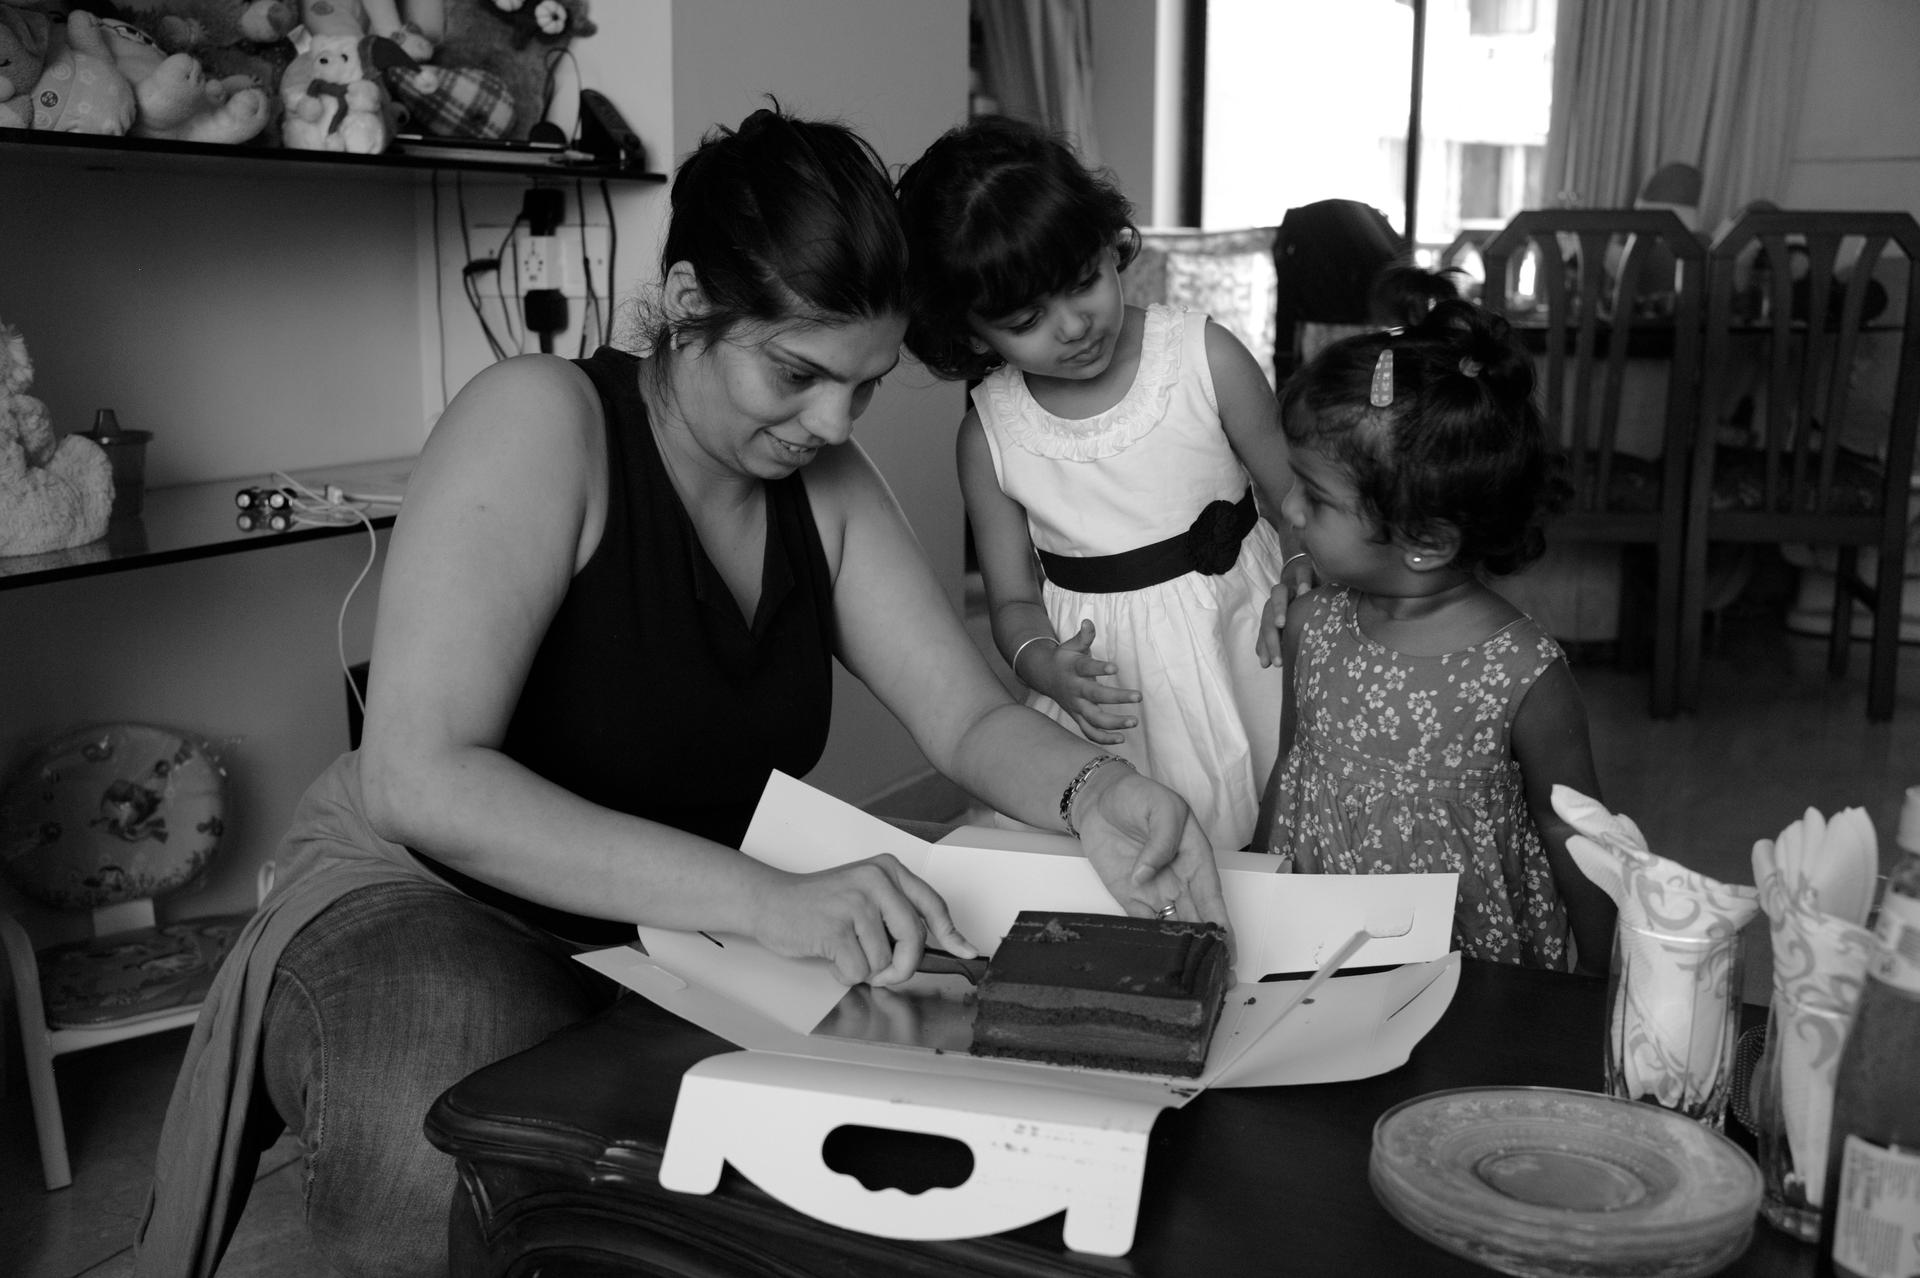 Ayesha D'Souza cuts some chocolate cake for her daughter and five-year-old friend Aliesha, also adopted.